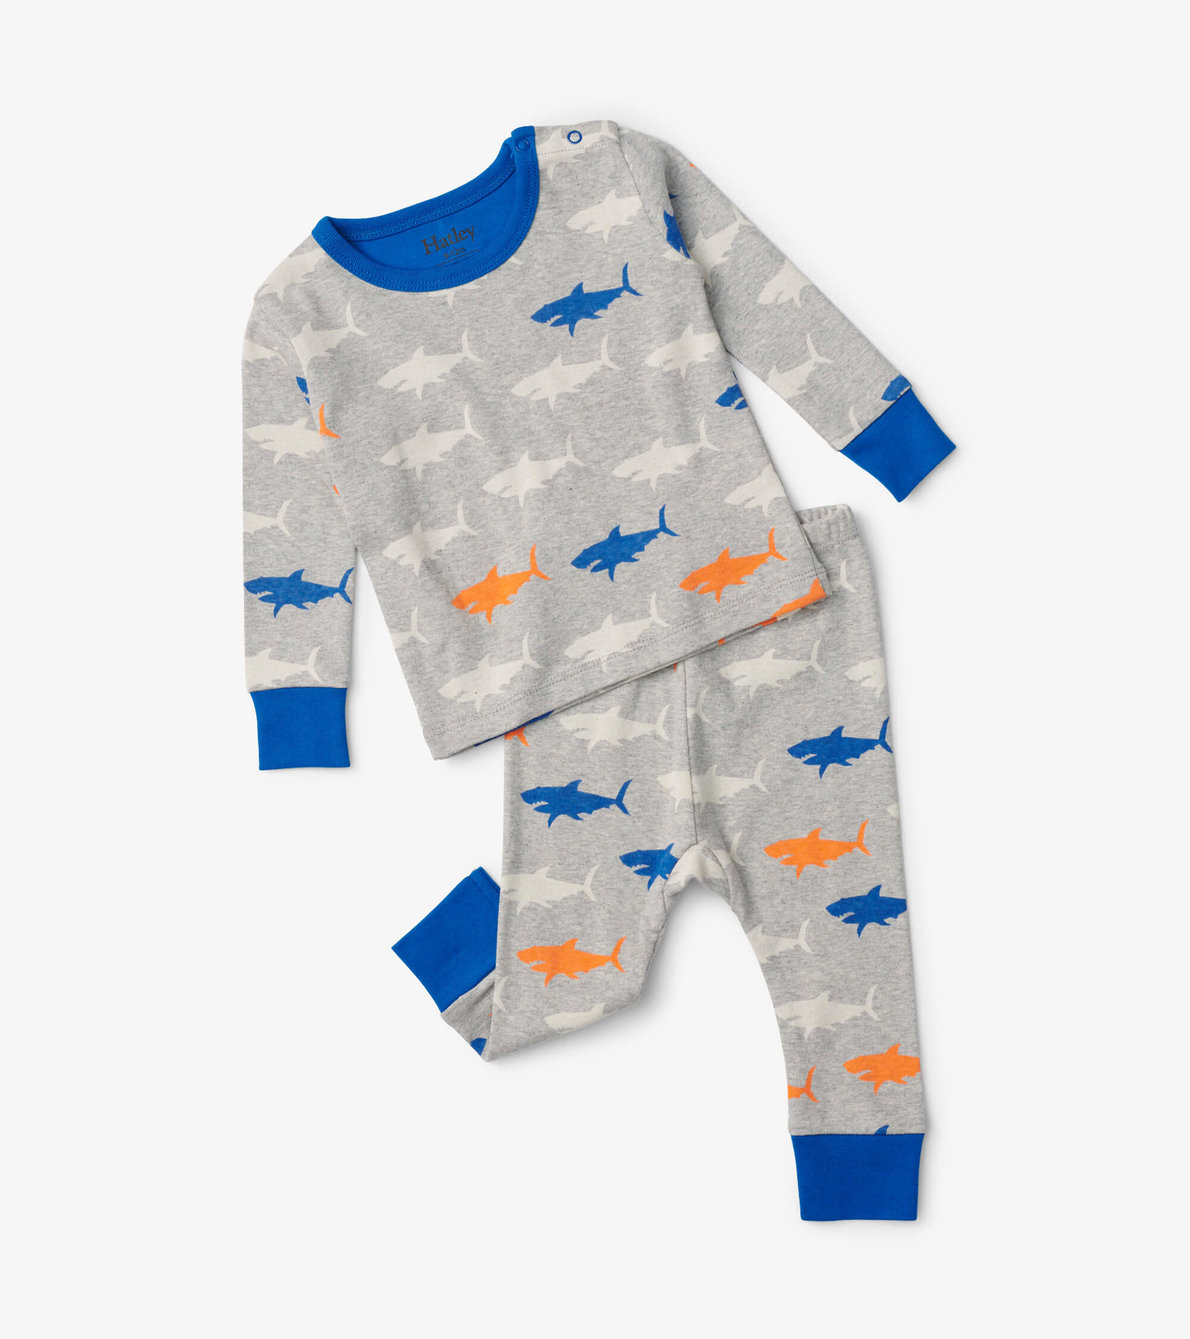 View larger image of Silhouette Sharks Baby Pajama Set